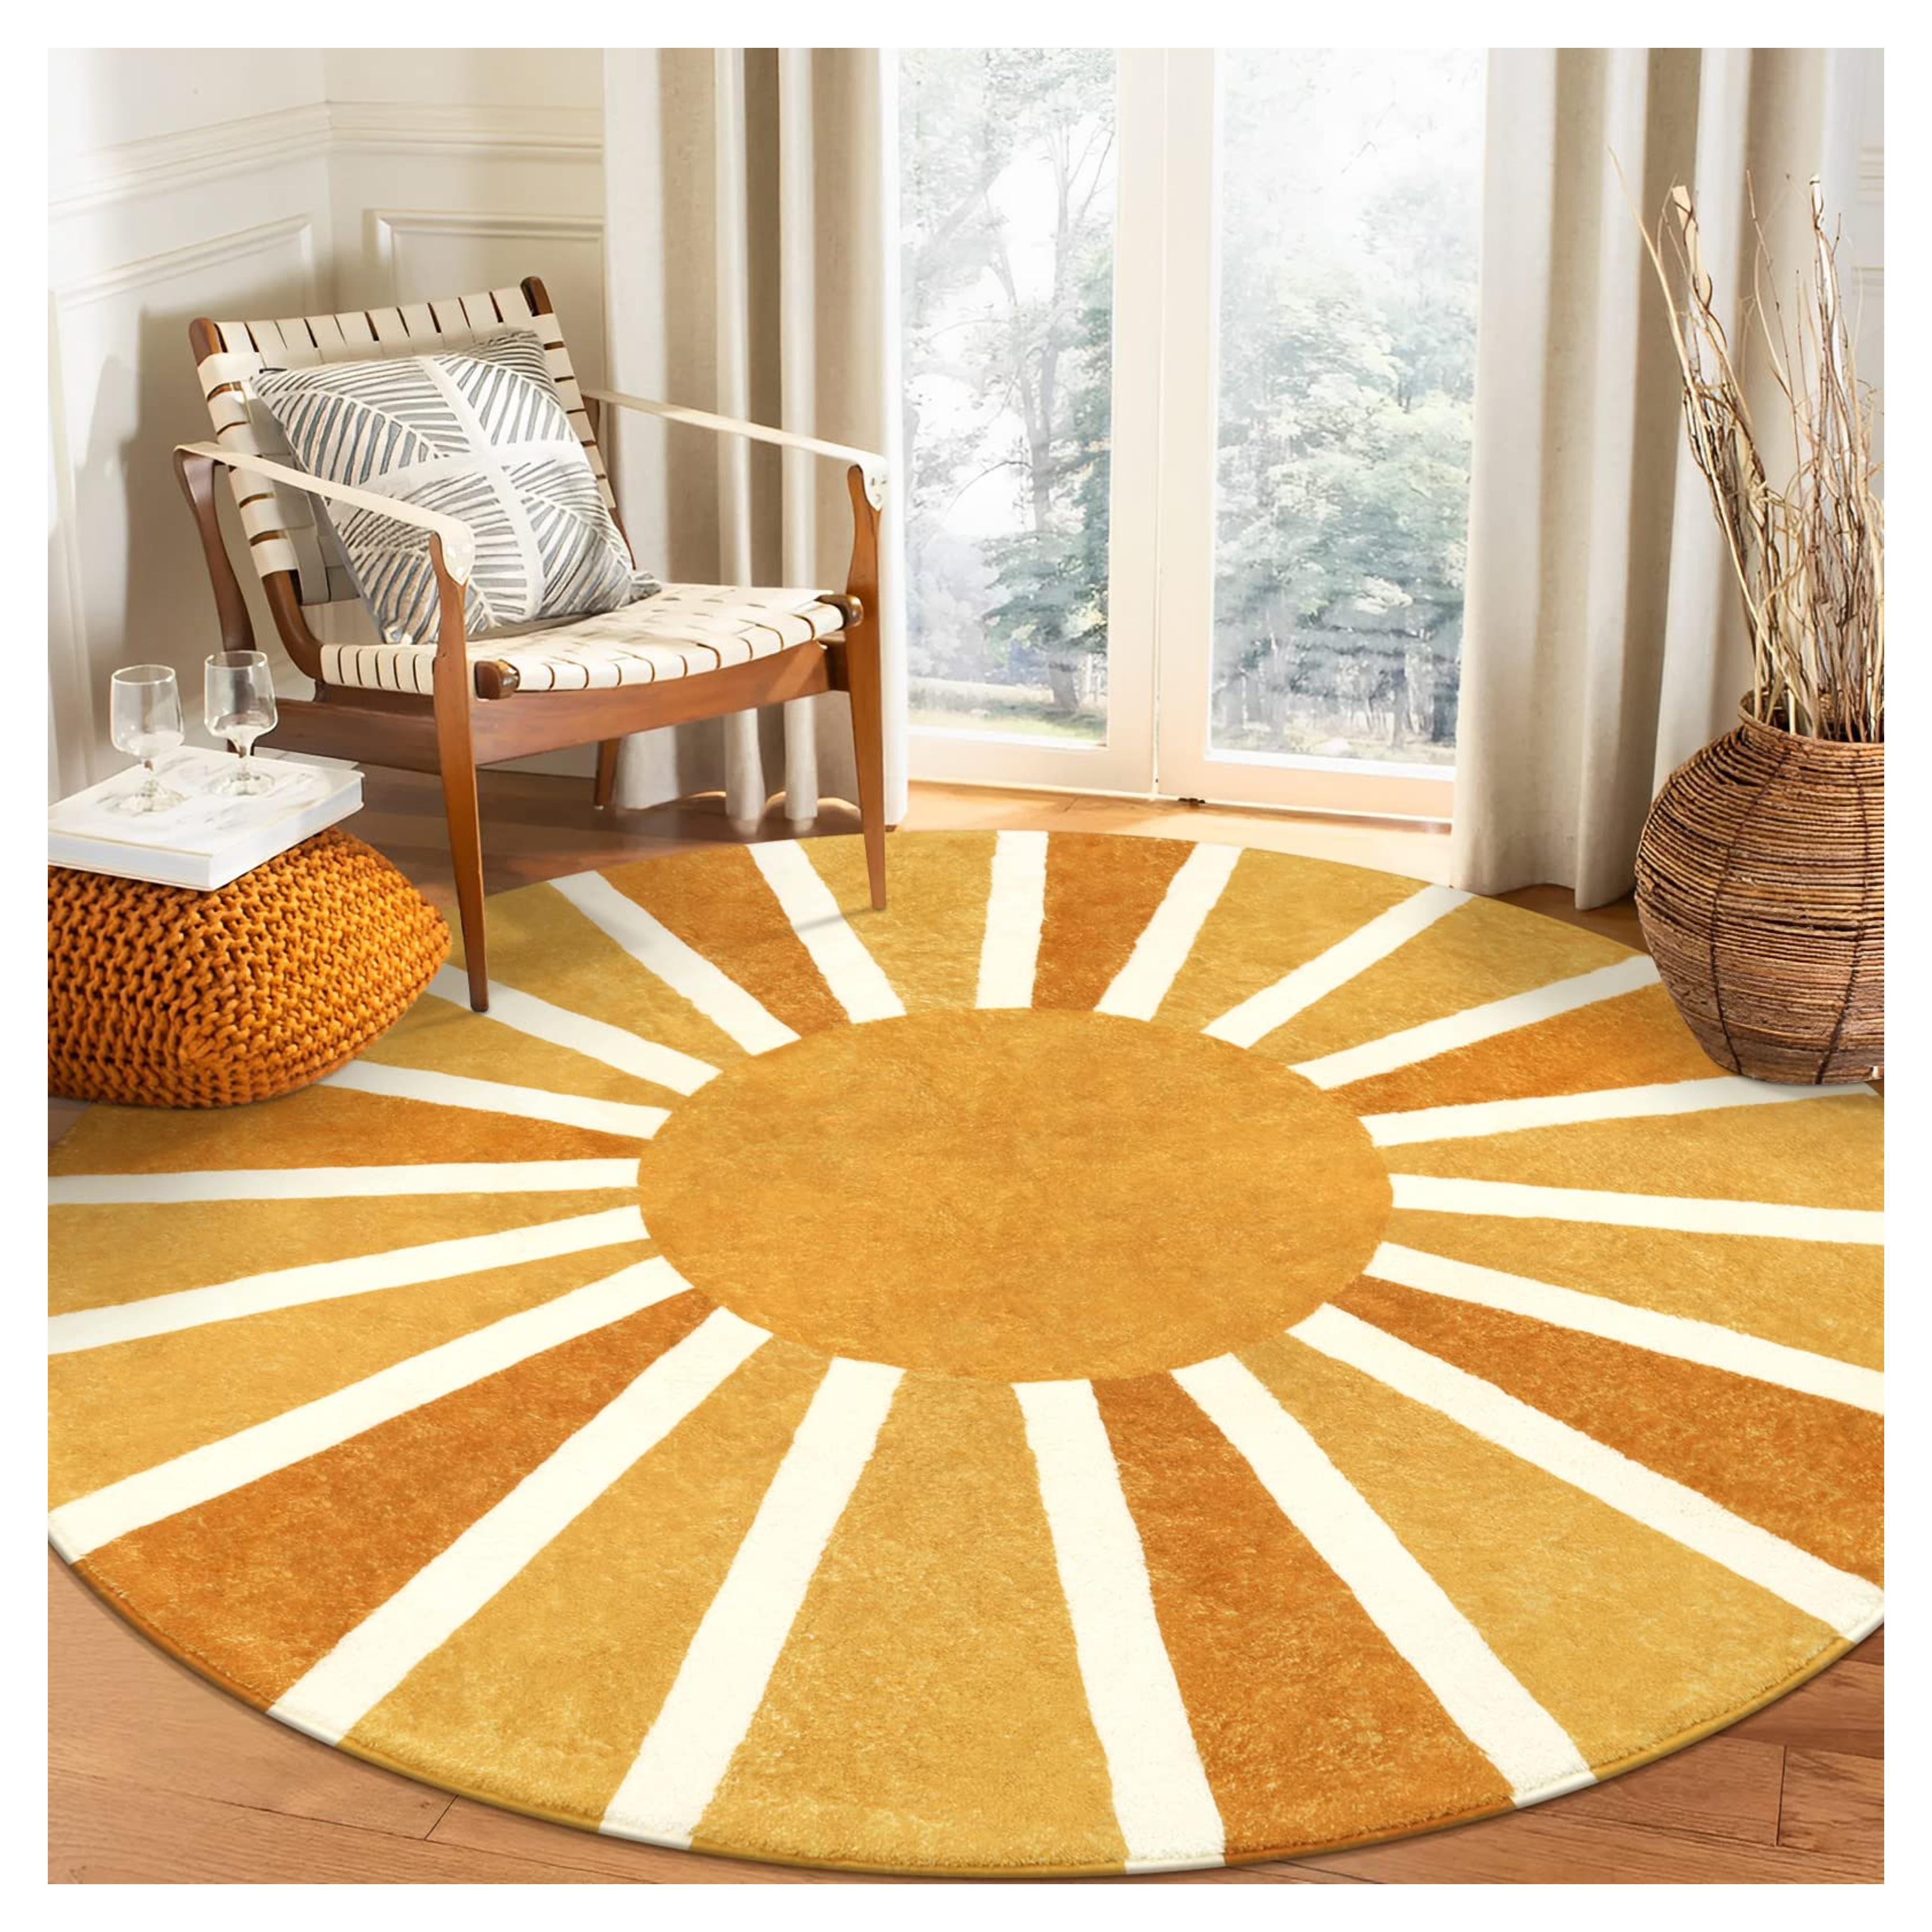 Lahome Boho Round Rug - 3Ft Washable Round Area Rug Non-Slip Small Round Bathroom Rug Throw Soft Kids Nursery Room Rugs Rainbow Sun Print Distressed Round Carpet for Bedroom Entryway Sofa Living Room